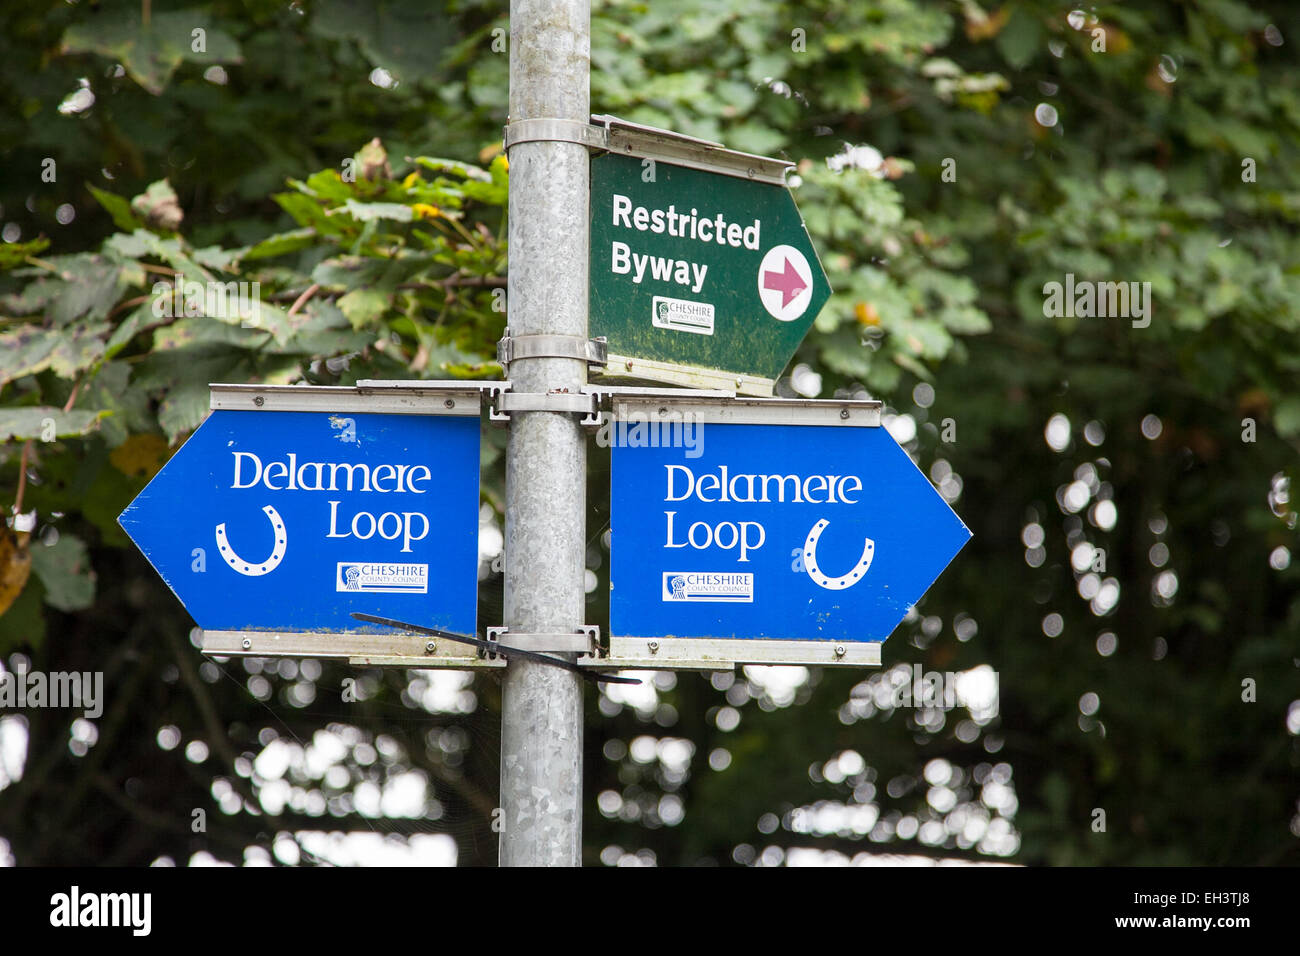 Signs for the Delamere Loop, a bridleway  for horses, near Delamere Forest Cheshire England UK Stock Photo